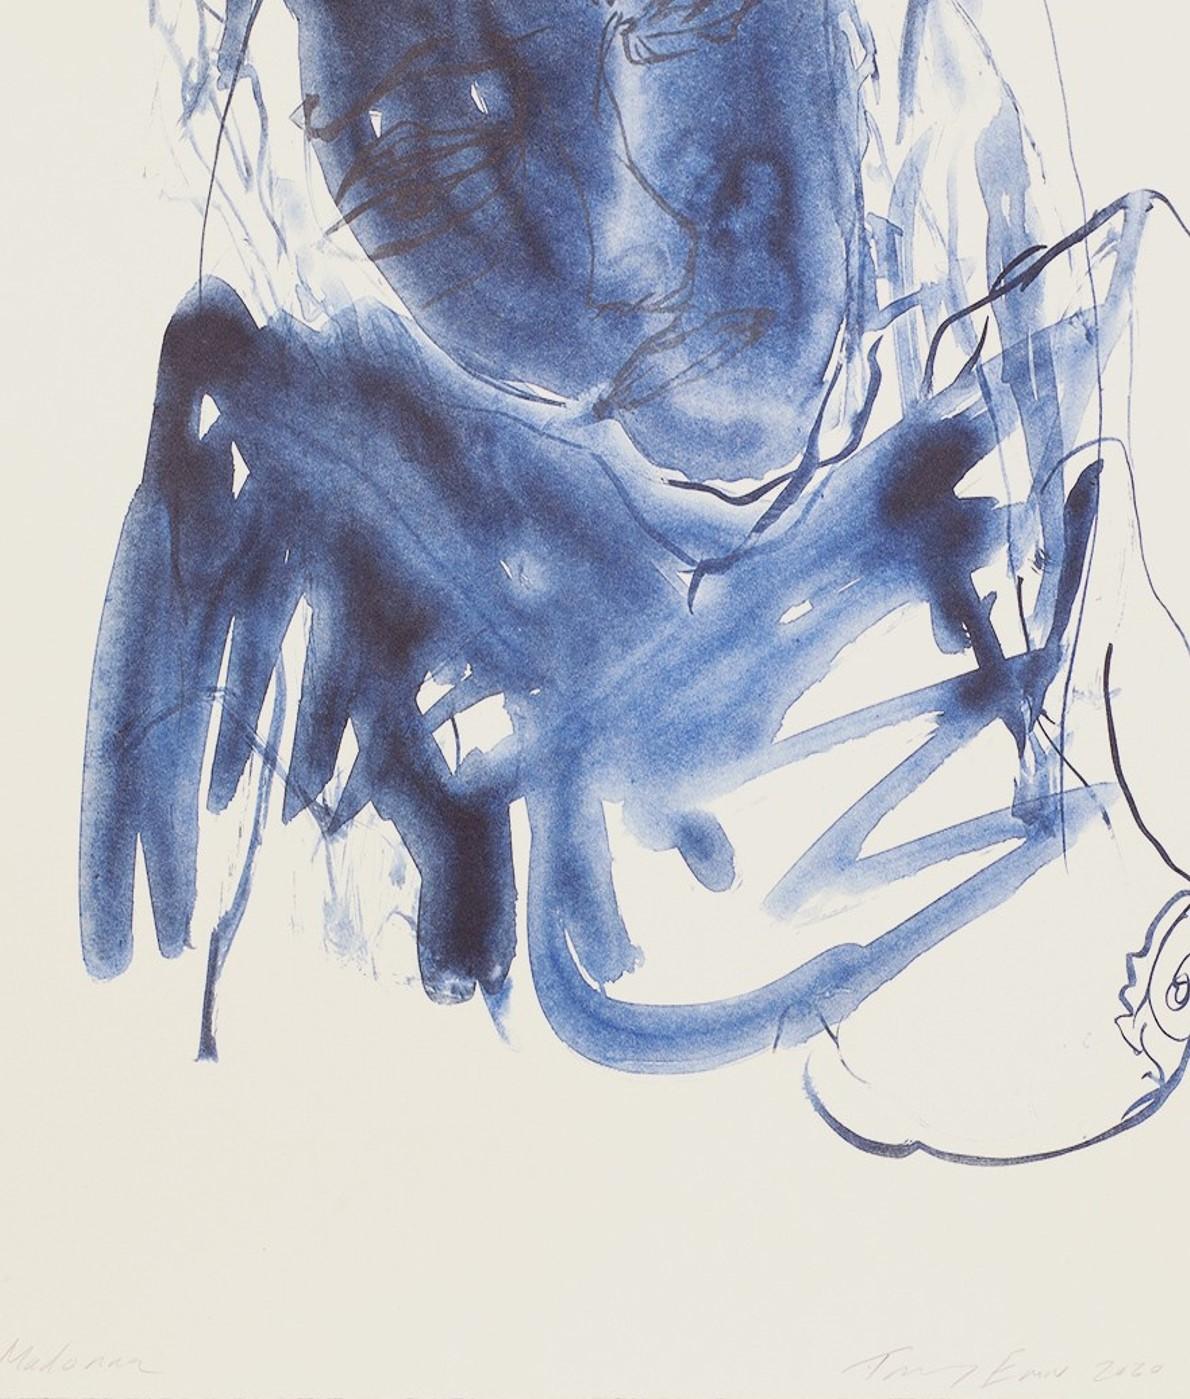 Blue Madonna - Emin, Contemporary, YBAs, Lithograph, Portrait, Black - Young British Artists (YBA) Print by Tracey Emin